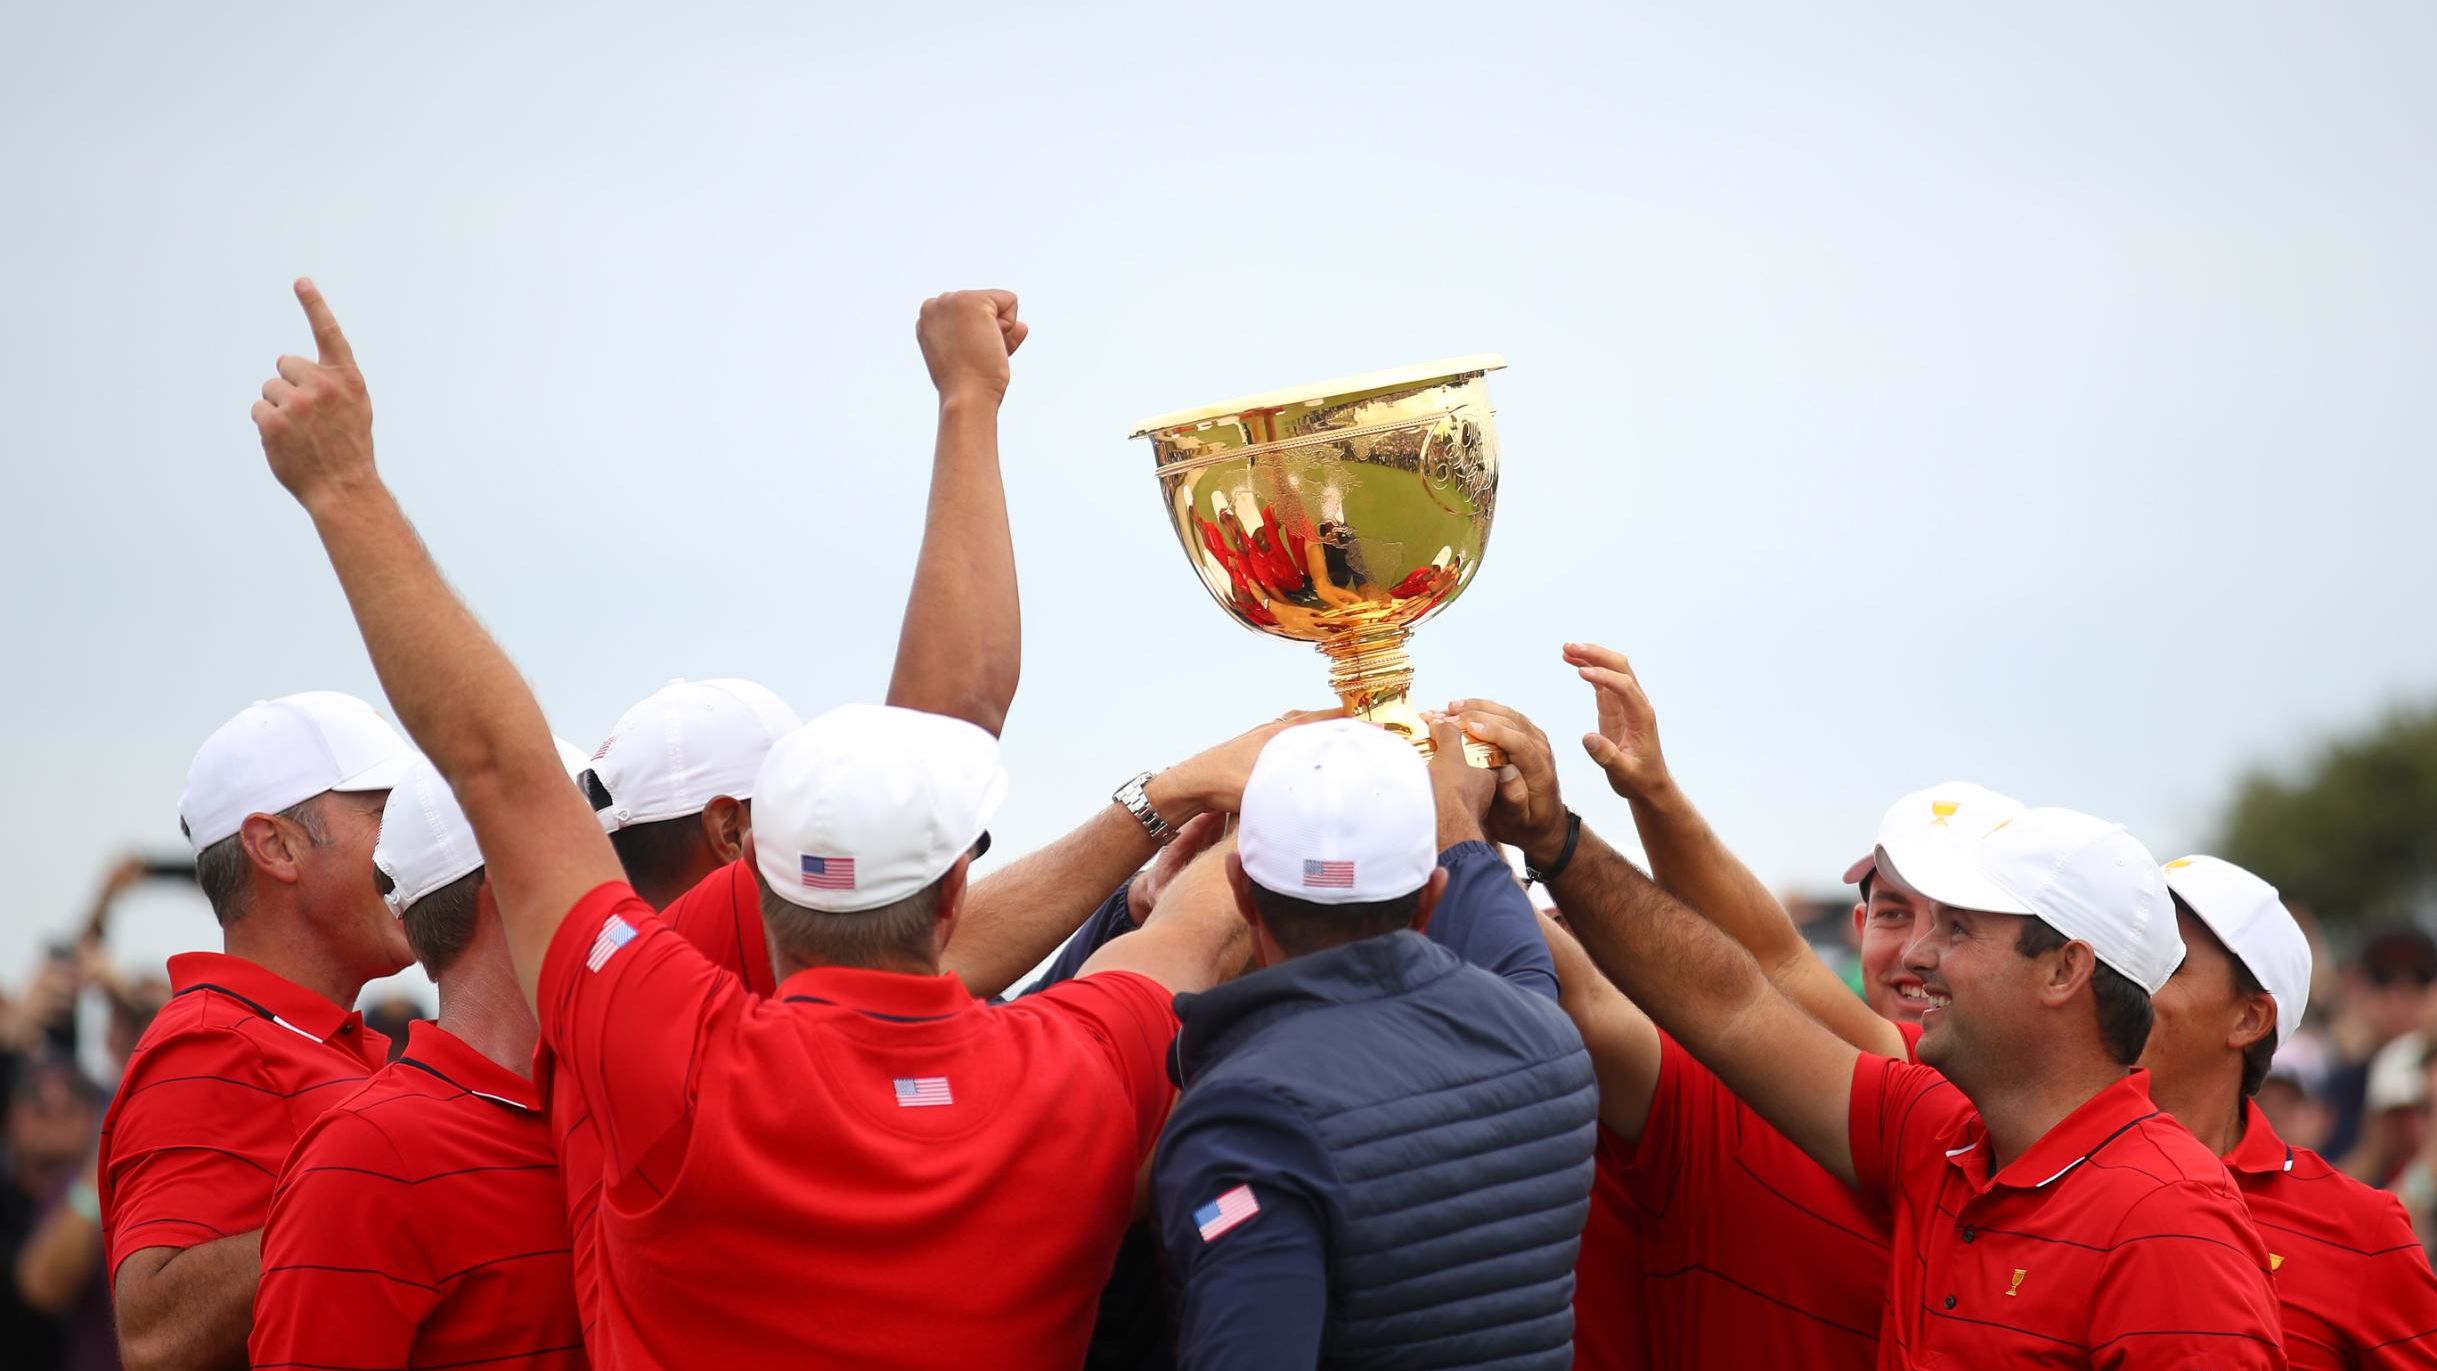 One for all ... and all for one ... the brotherhood of the US Presidents Cup team.